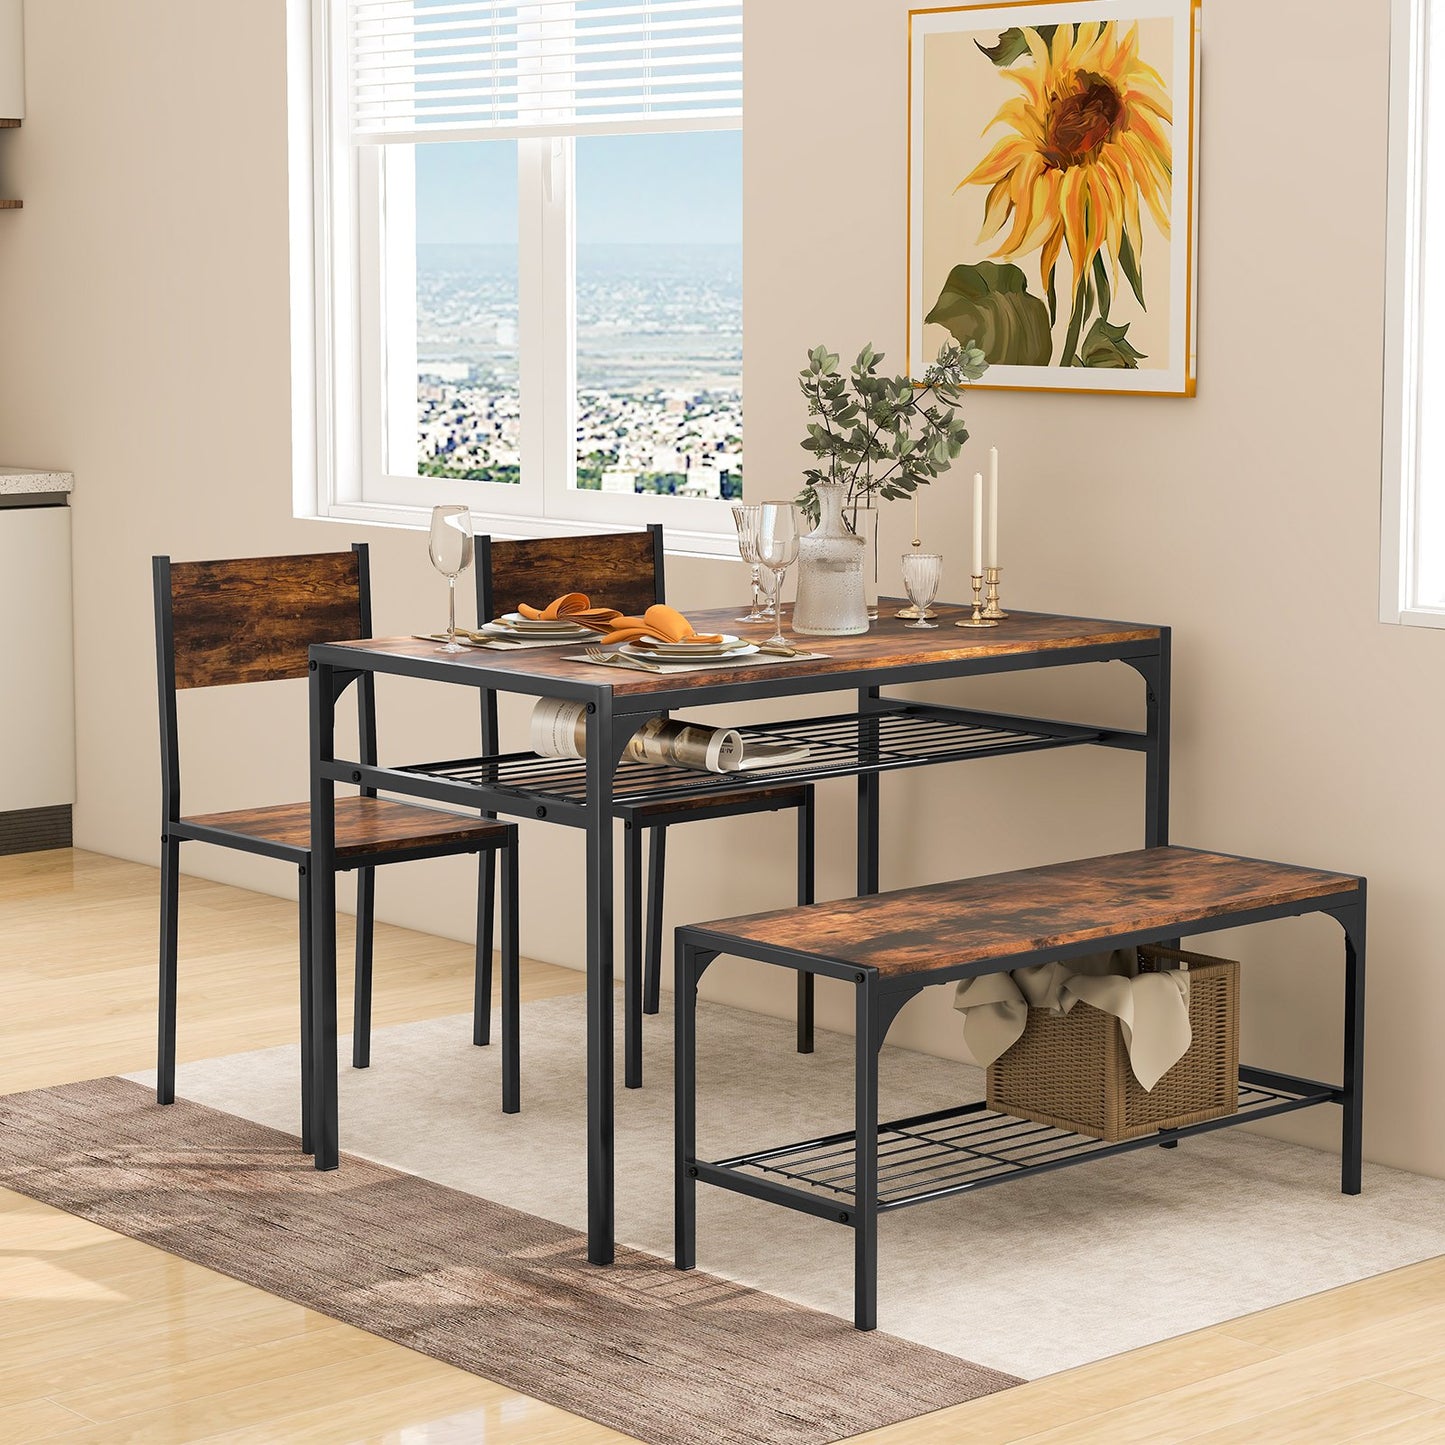 Industrial Style Rectangular Kitchen Table with Bench and Chairs, Rustic Brown